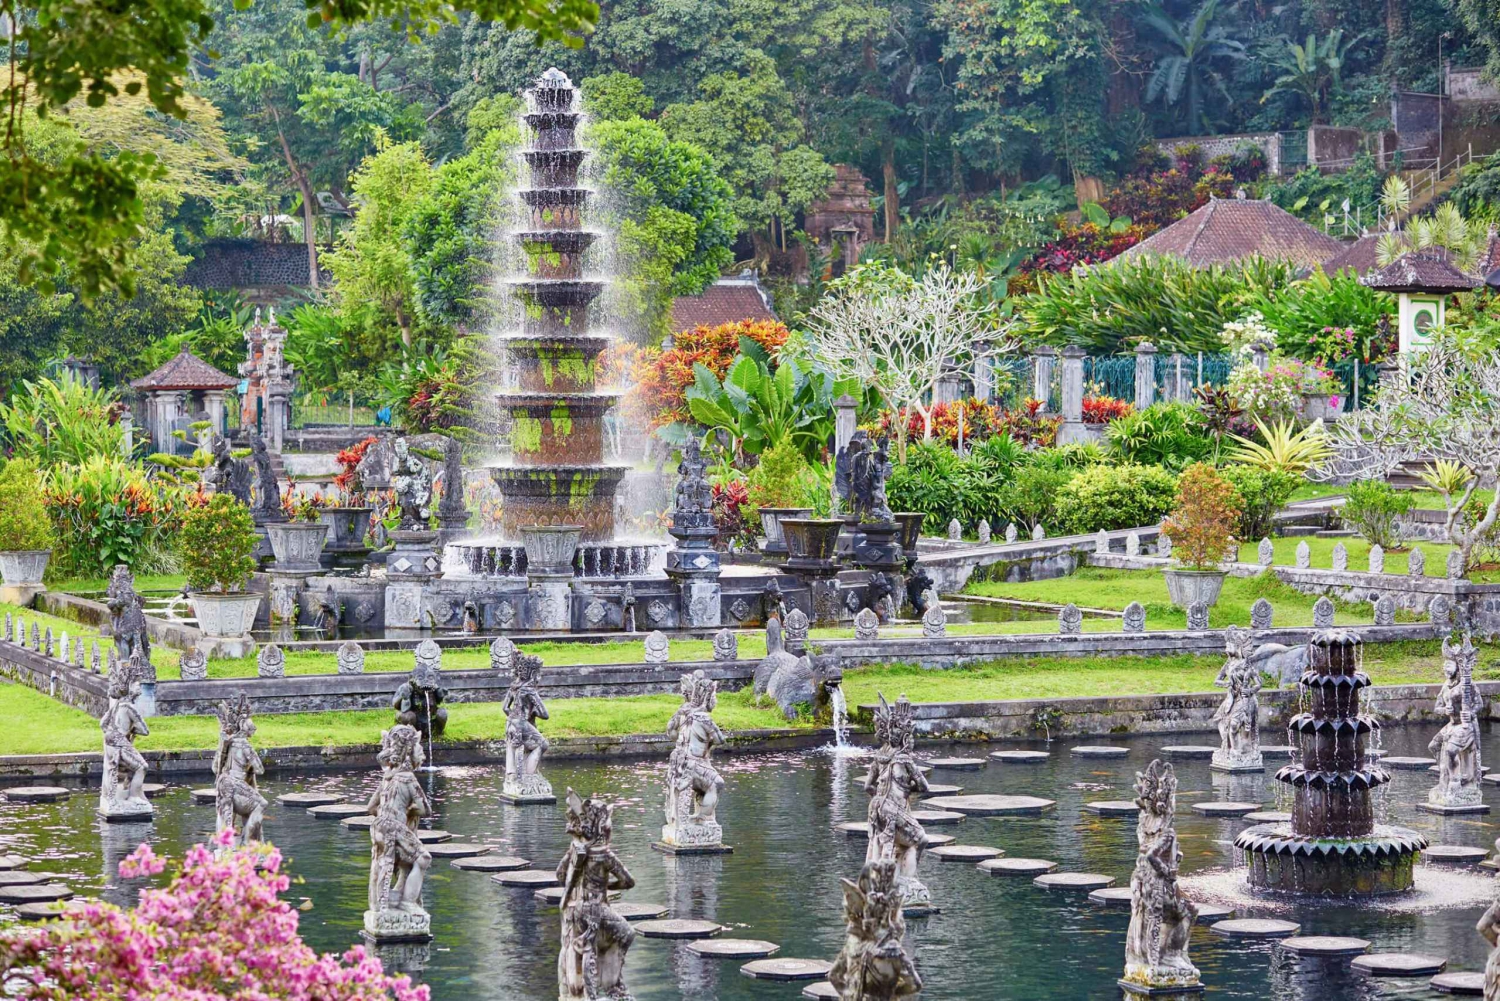 Bali: Two Day East Island Tour